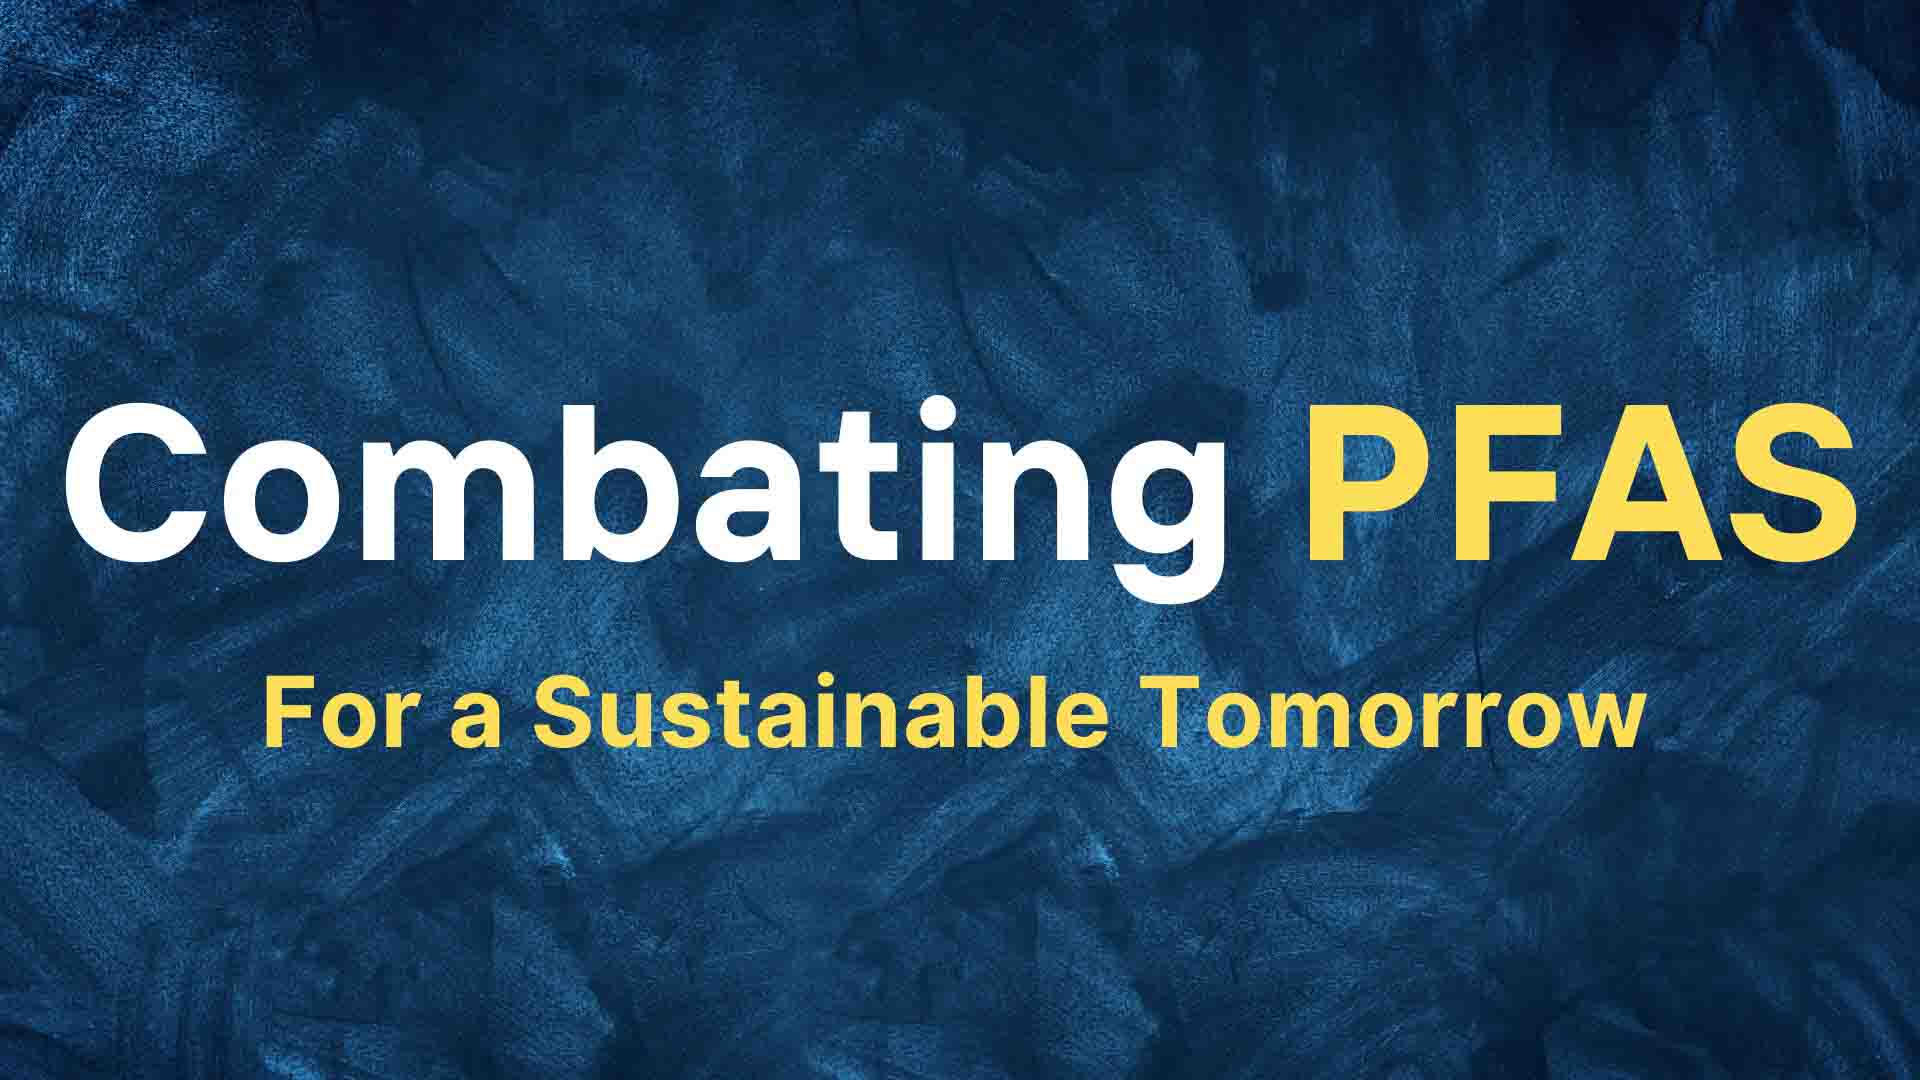 Combating PFAS for a Sustainable Tomorrow